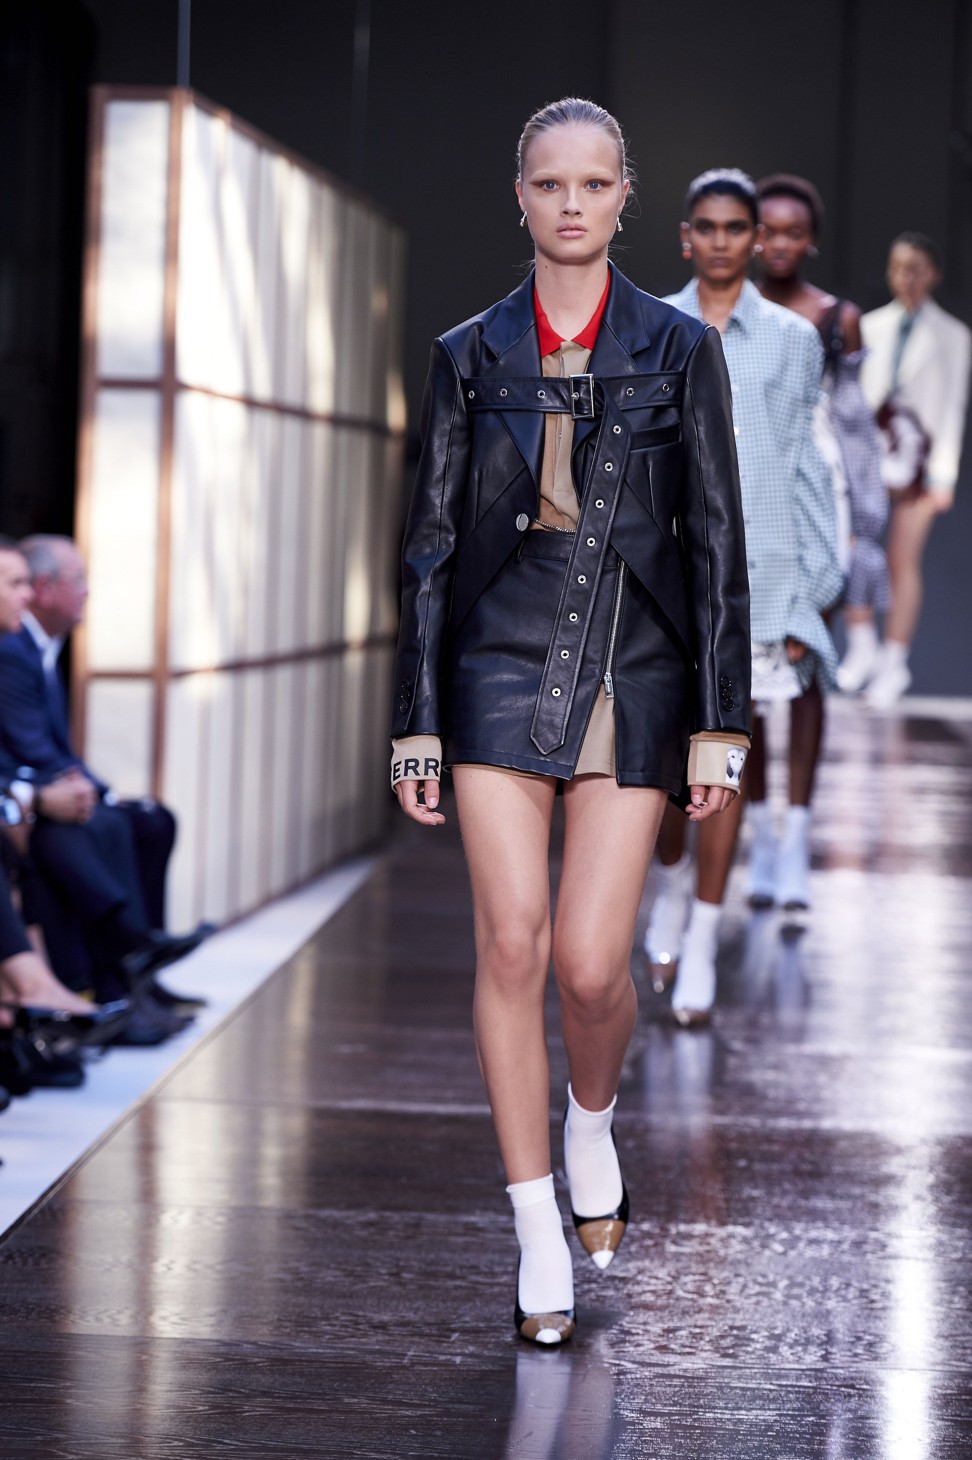 A catwalk model presents a creation from Burberry’s new upmarket spring-summer collection show at London Fashion Week, which features some of the darker, sexier styles for which new designer Riccardo Tisci is known. Photo: AFP